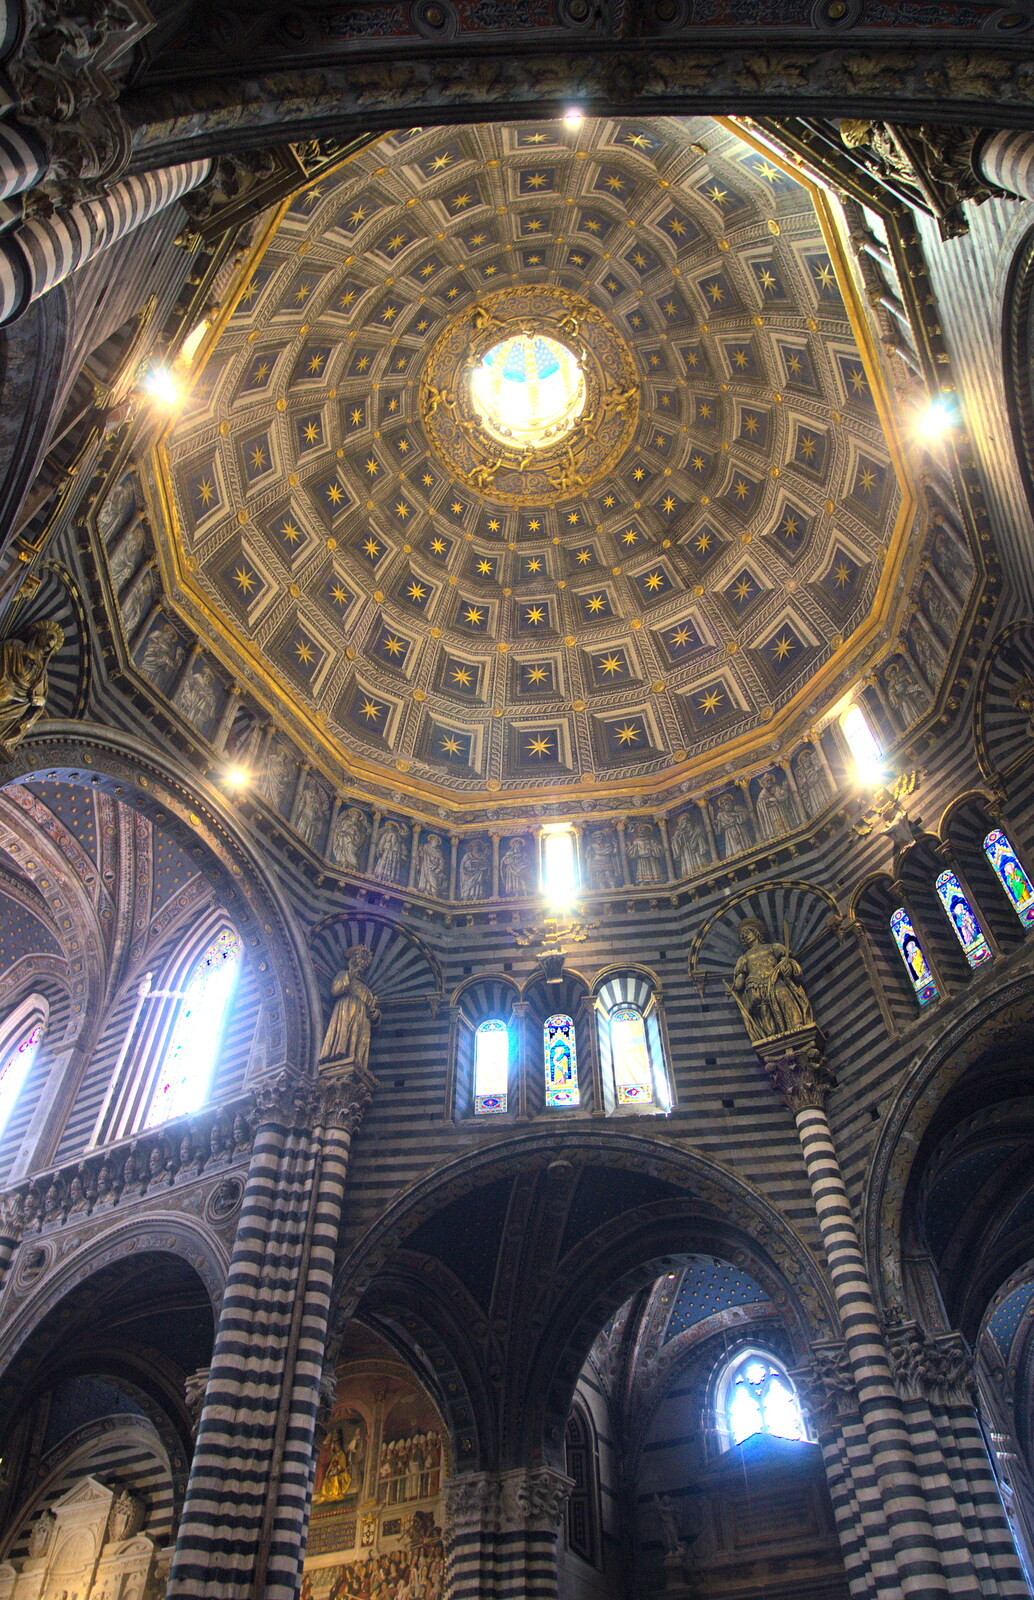 A Tuscan Winery and a Trip to Siena, Tuscany, Italy - 10th June 2013: Looking up at the underside of the dome